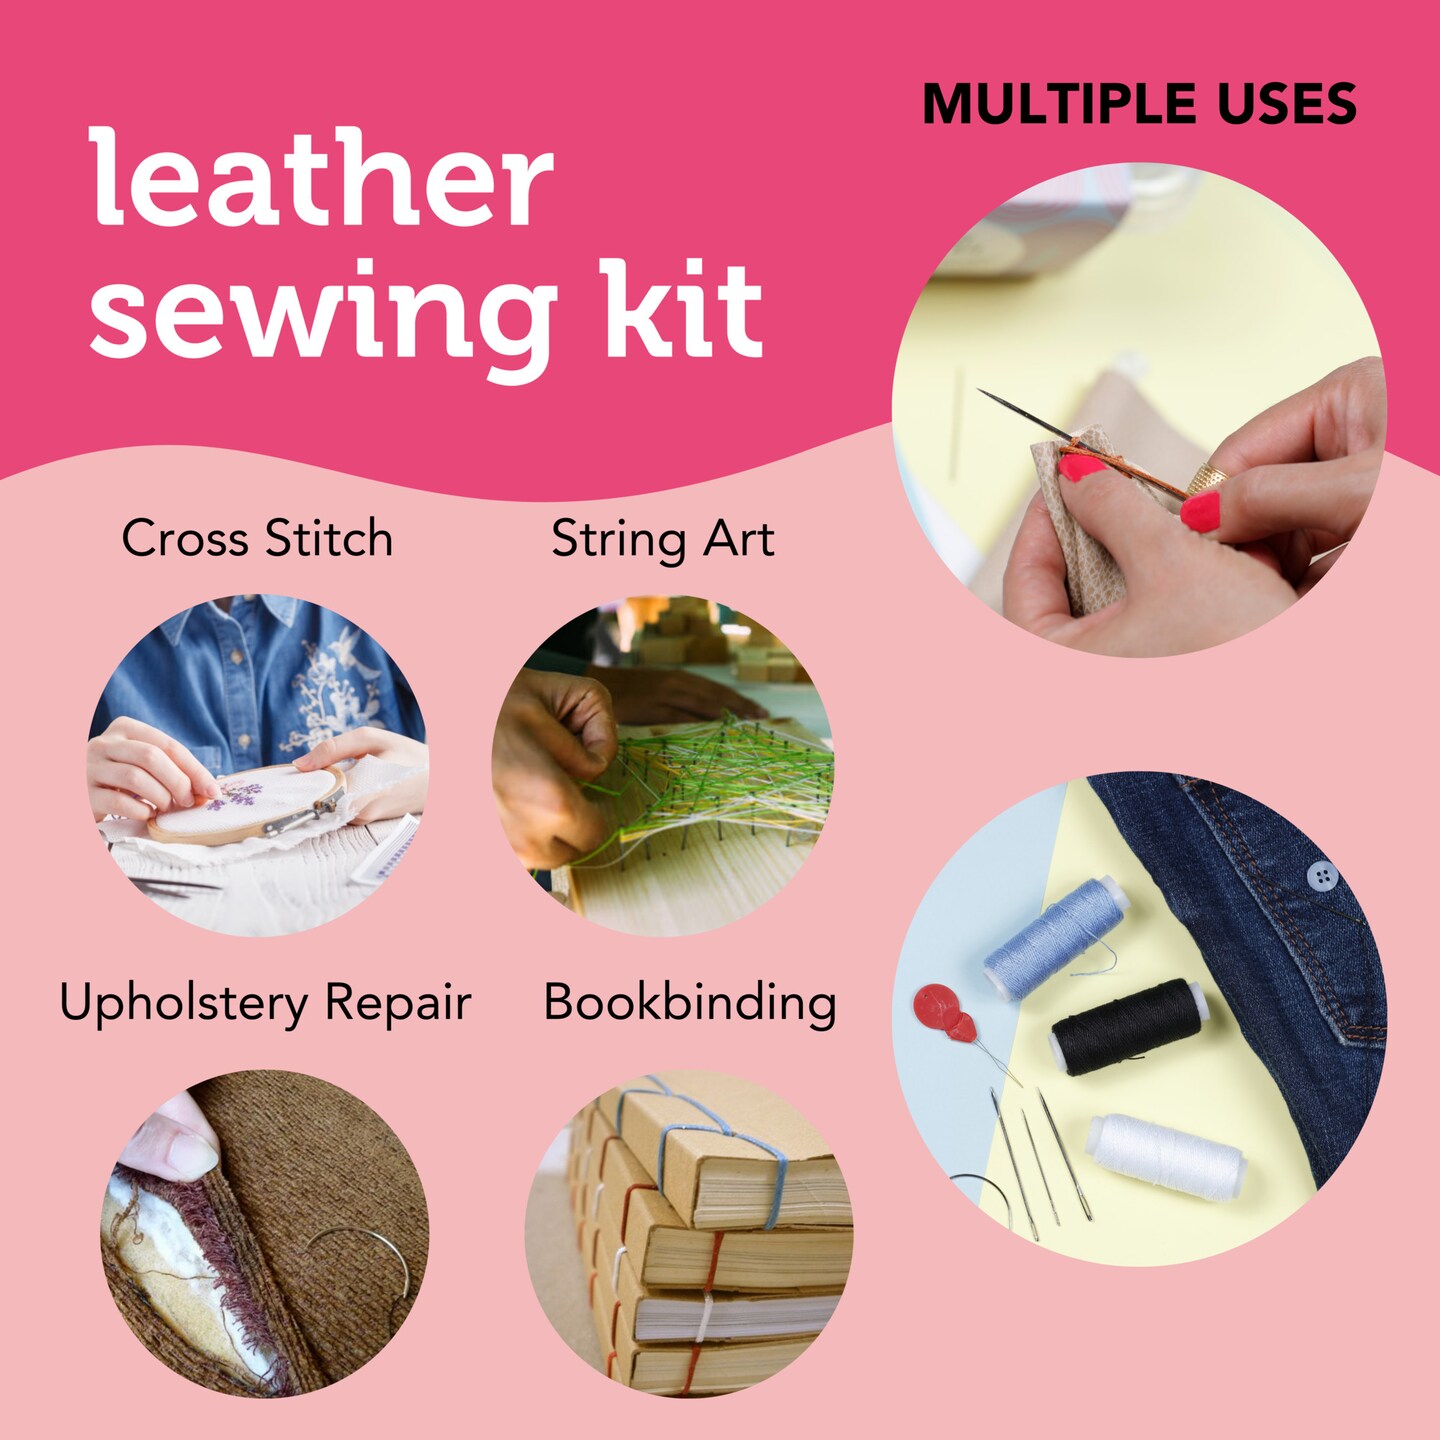 21-Piece Leather Sewing Kit for Upholstery Repair and Crafts